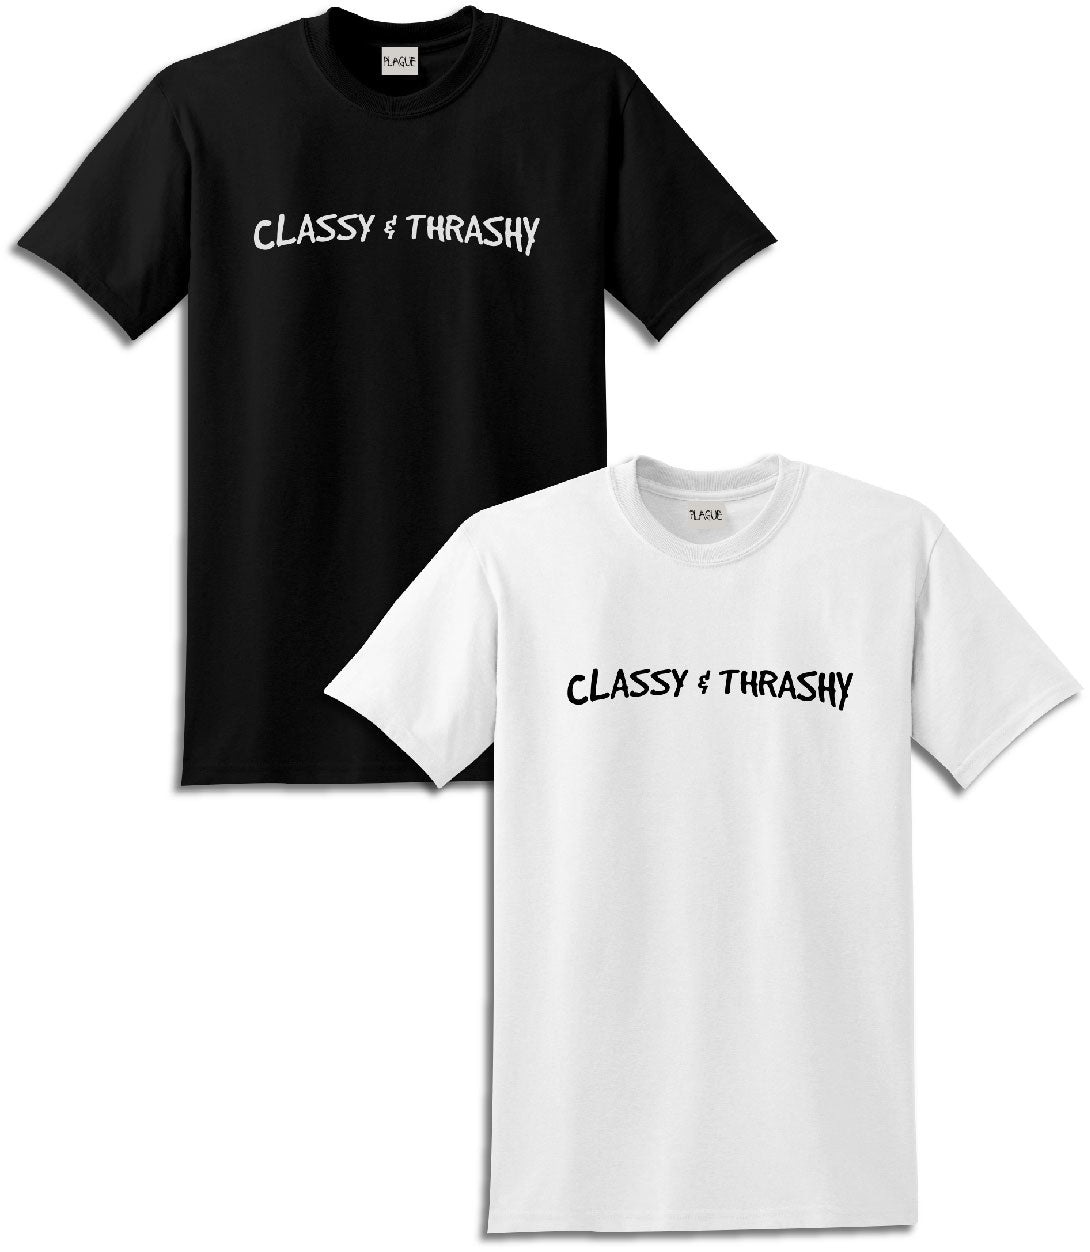 Text reading "Classy & Thrashy" on front. Available in black or white